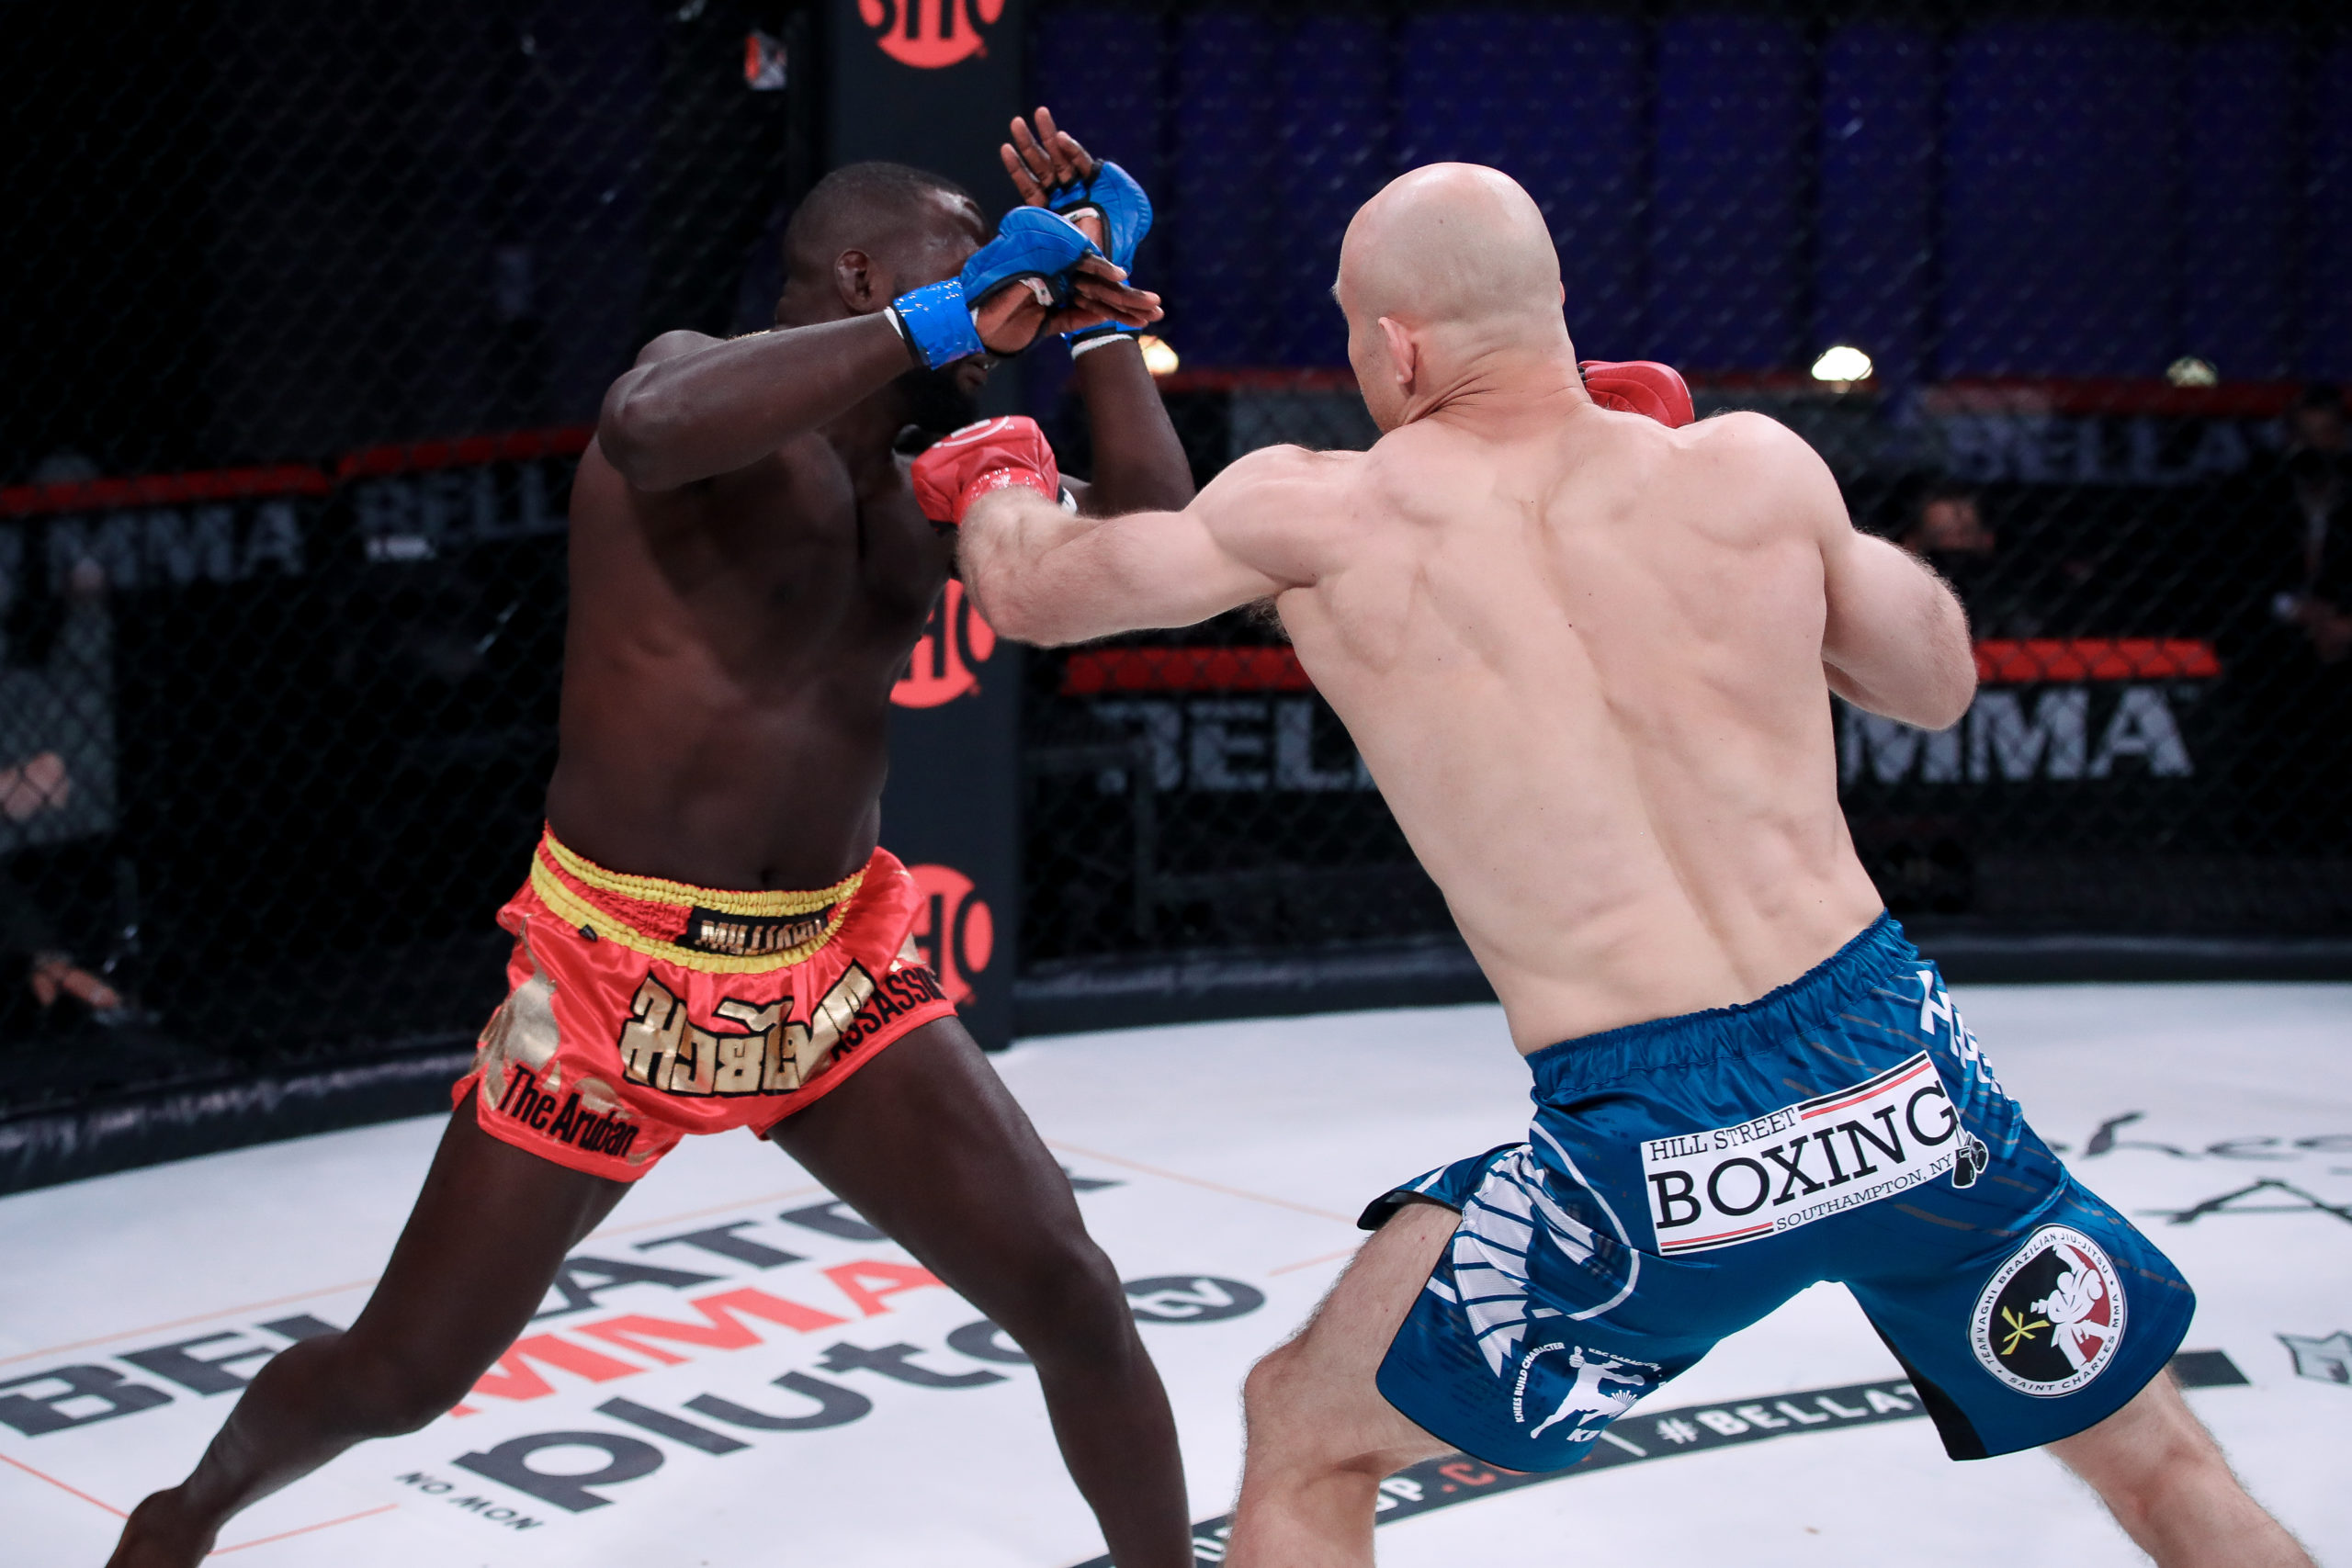 Julius Anglickas gets his armed raised in his most recently victory this past April over Gregory Millard at Bellator 257.